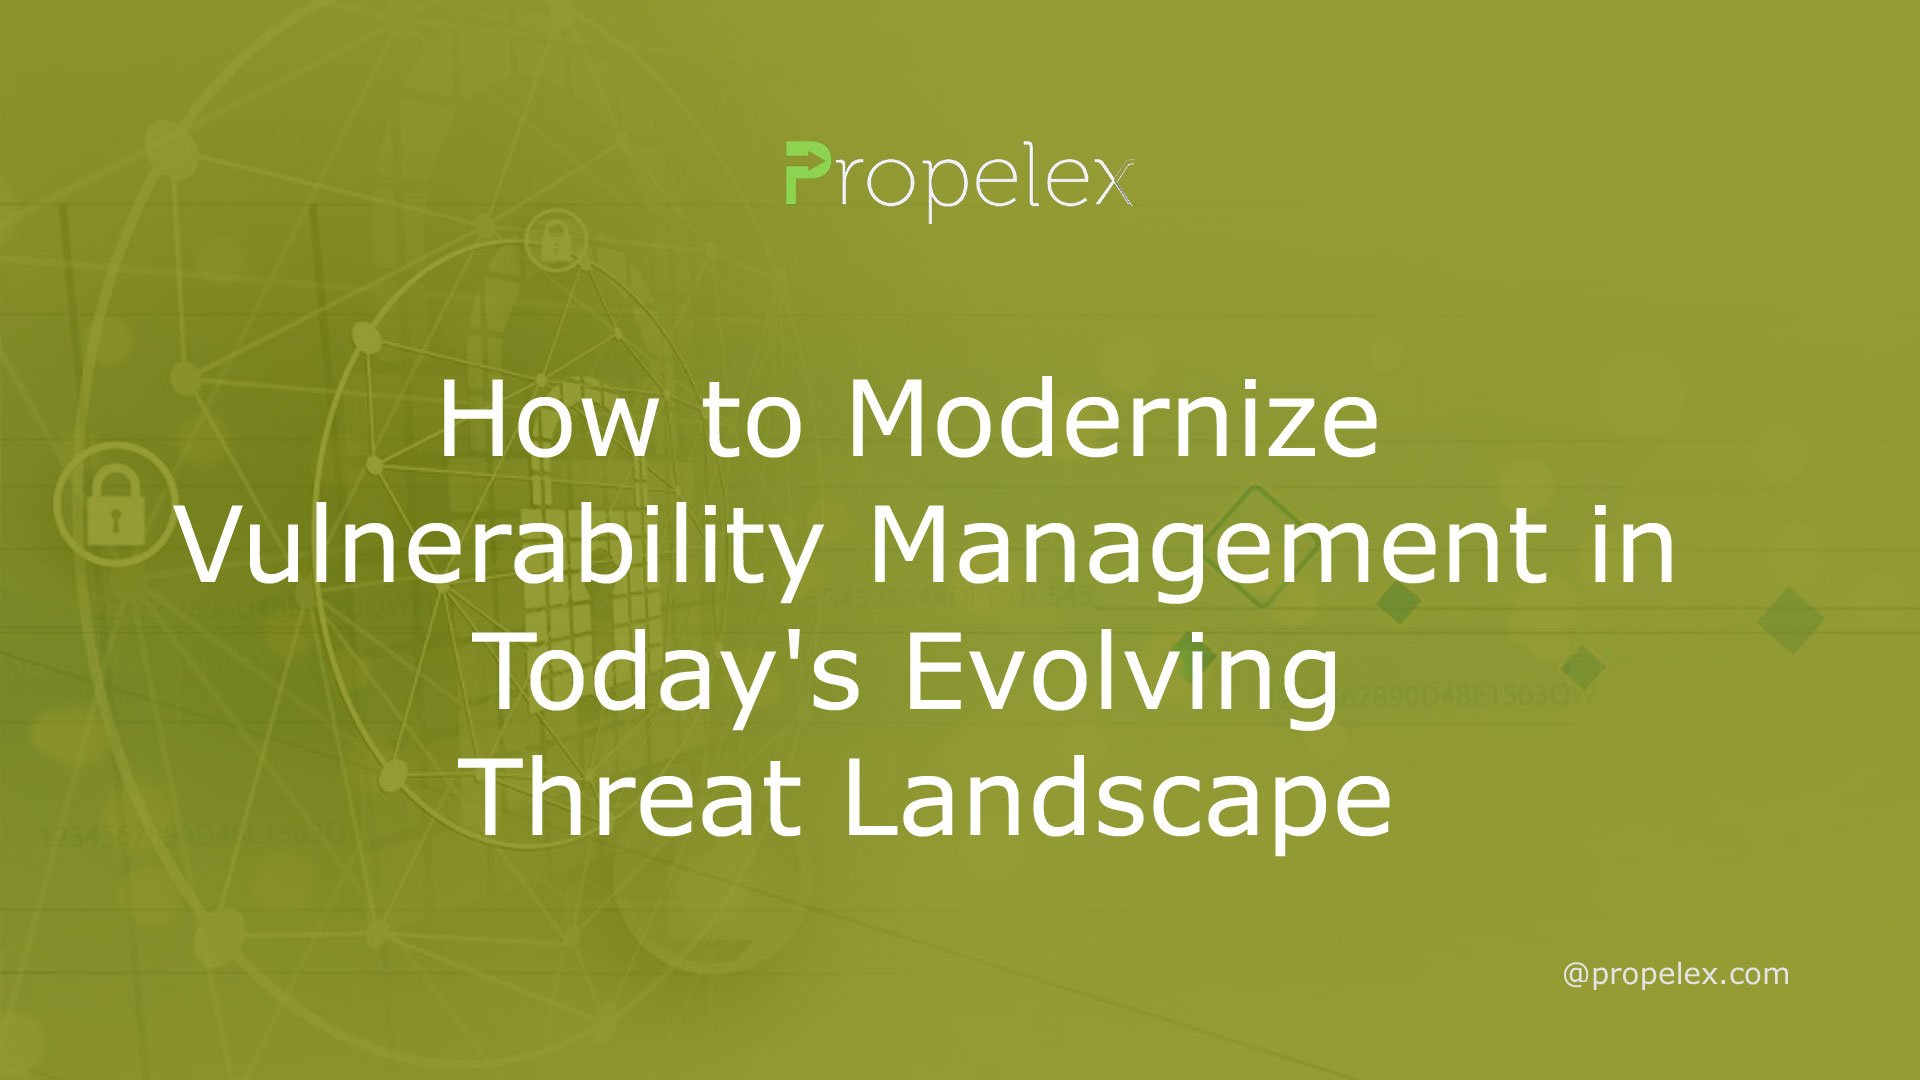 How to Modernize Vulnerability Management in Today's Evolving Threat Landscape